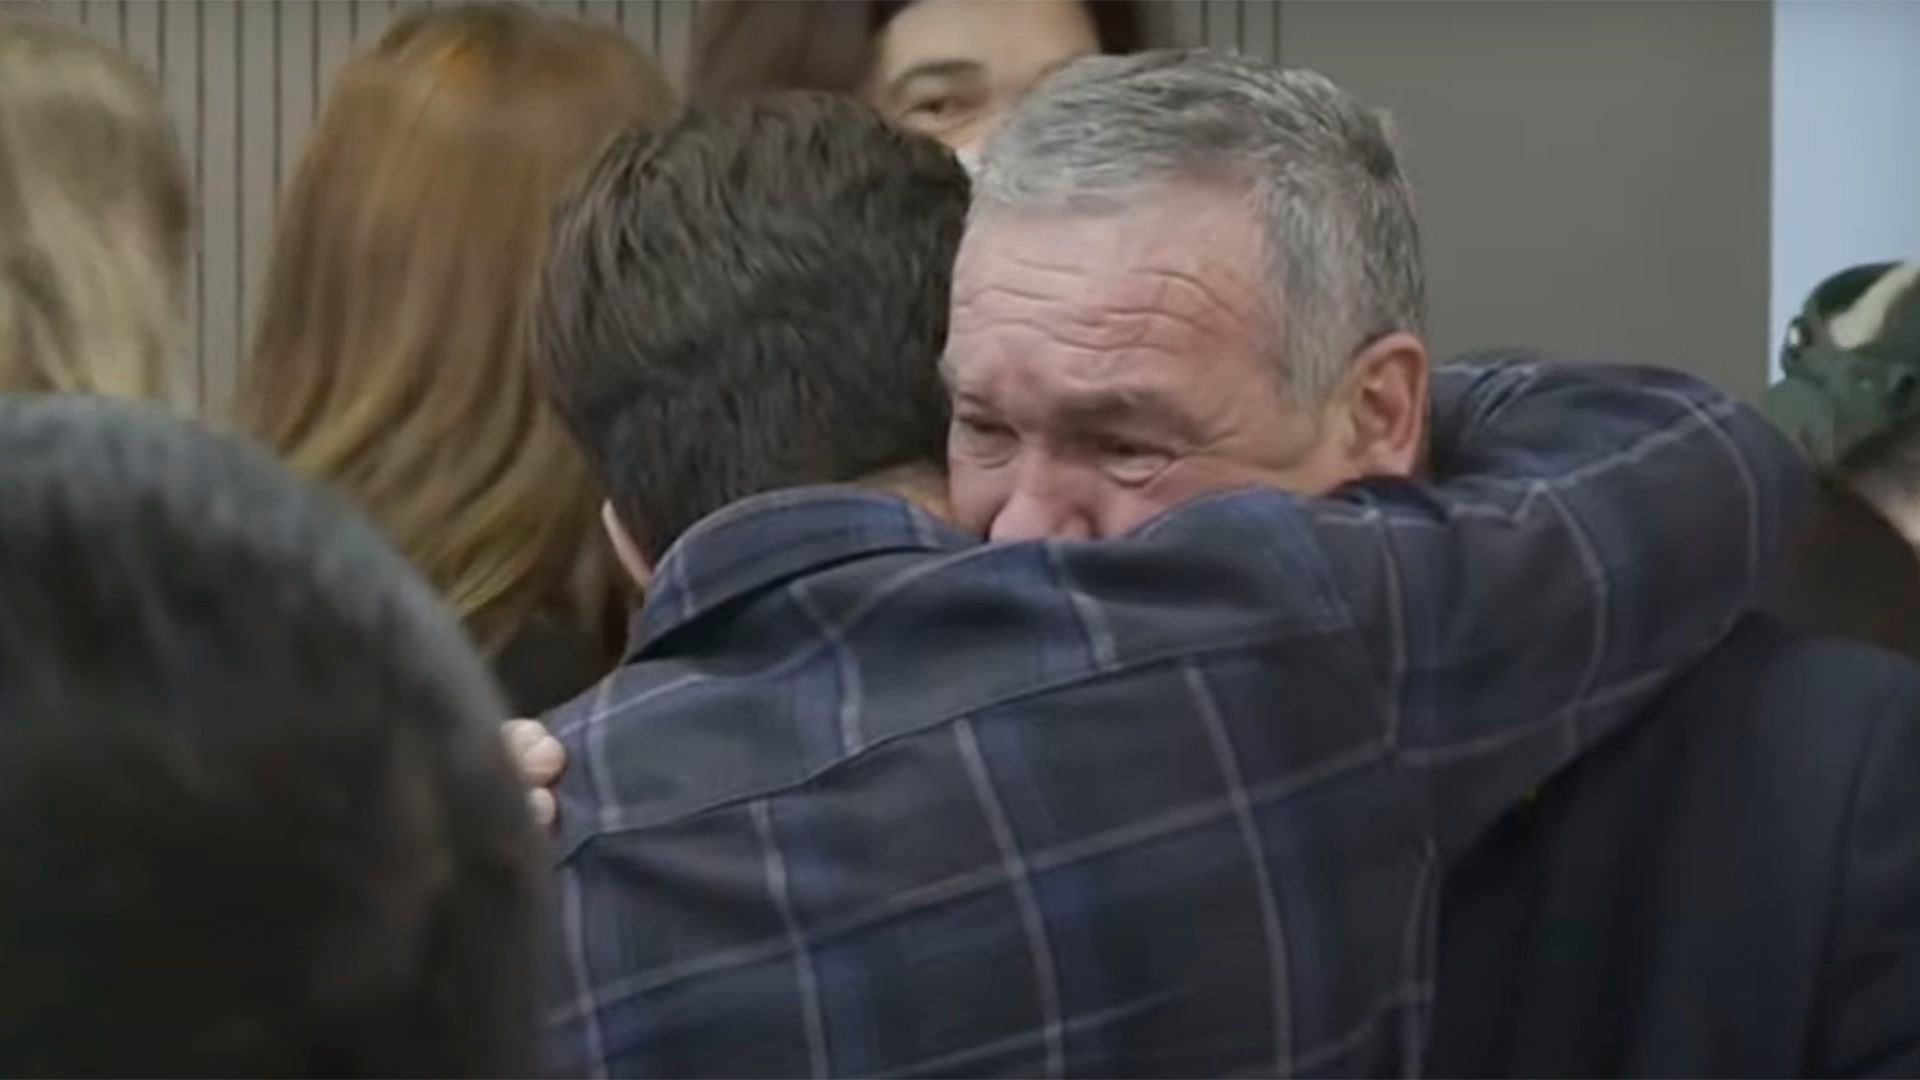 Macarrón hugs his son after being acquitted